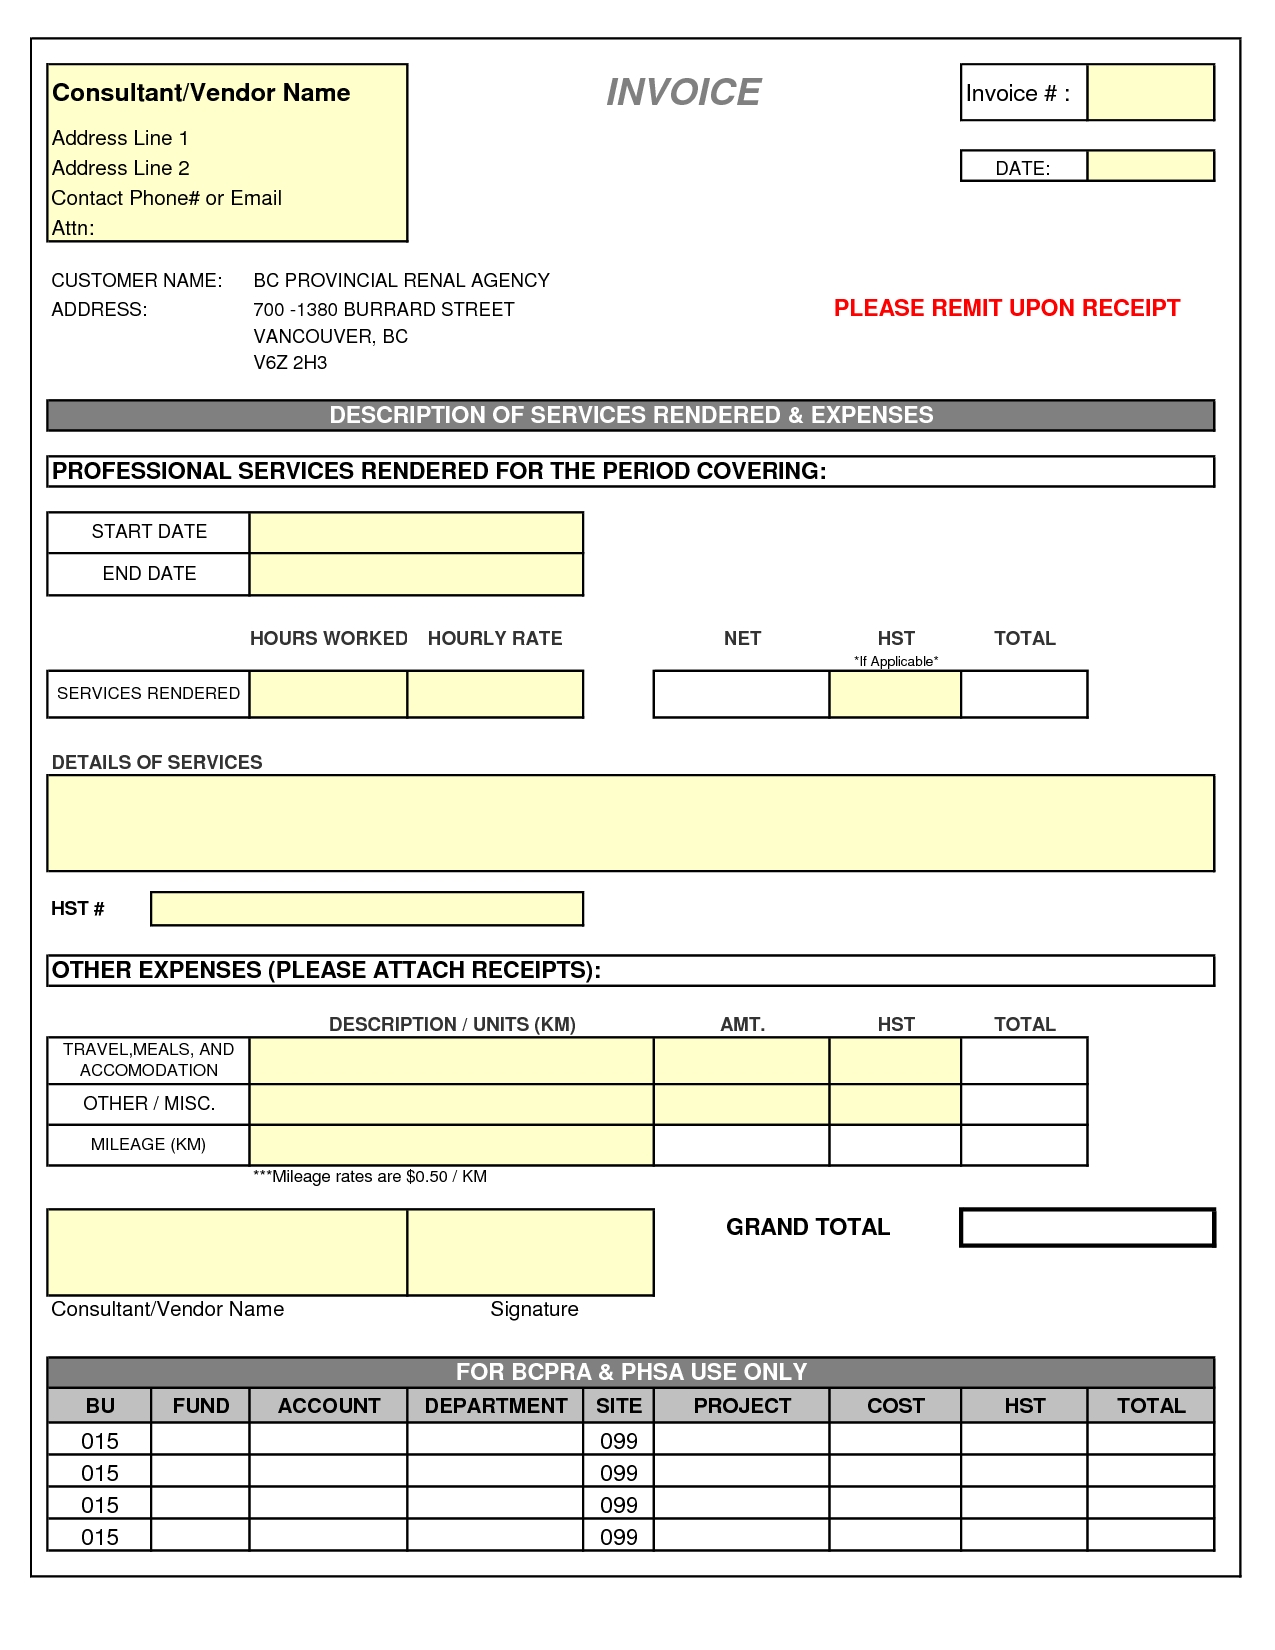 consulting services invoice template invoice templat free invoice for consulting services